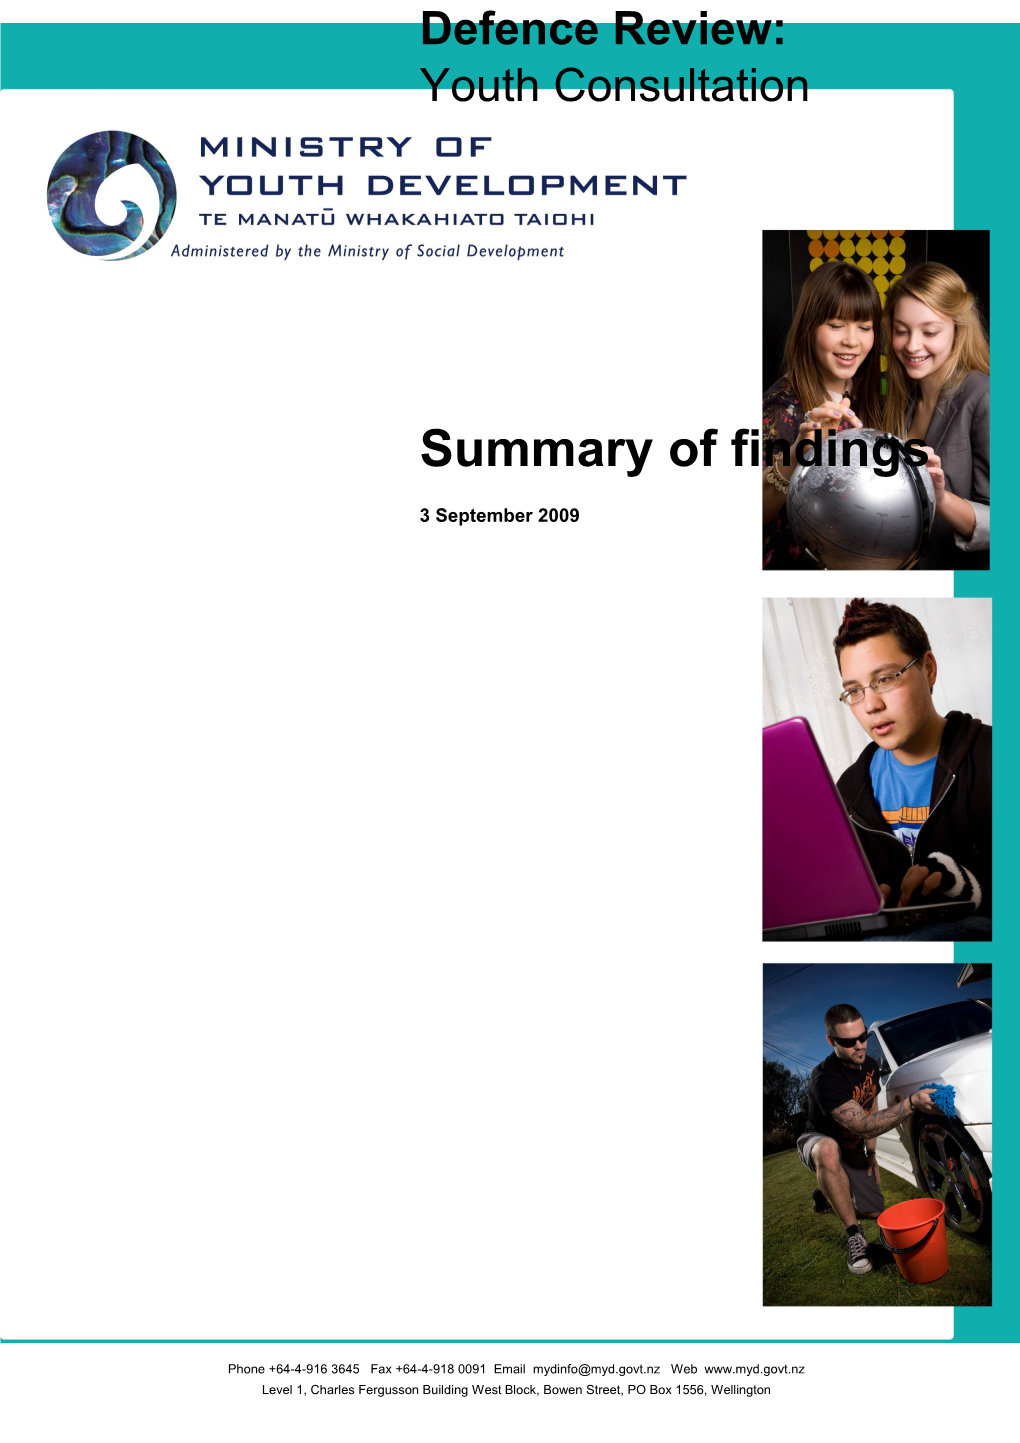 This Report Contributes to the Defence Review 2009, by Presenting the Views of Young People